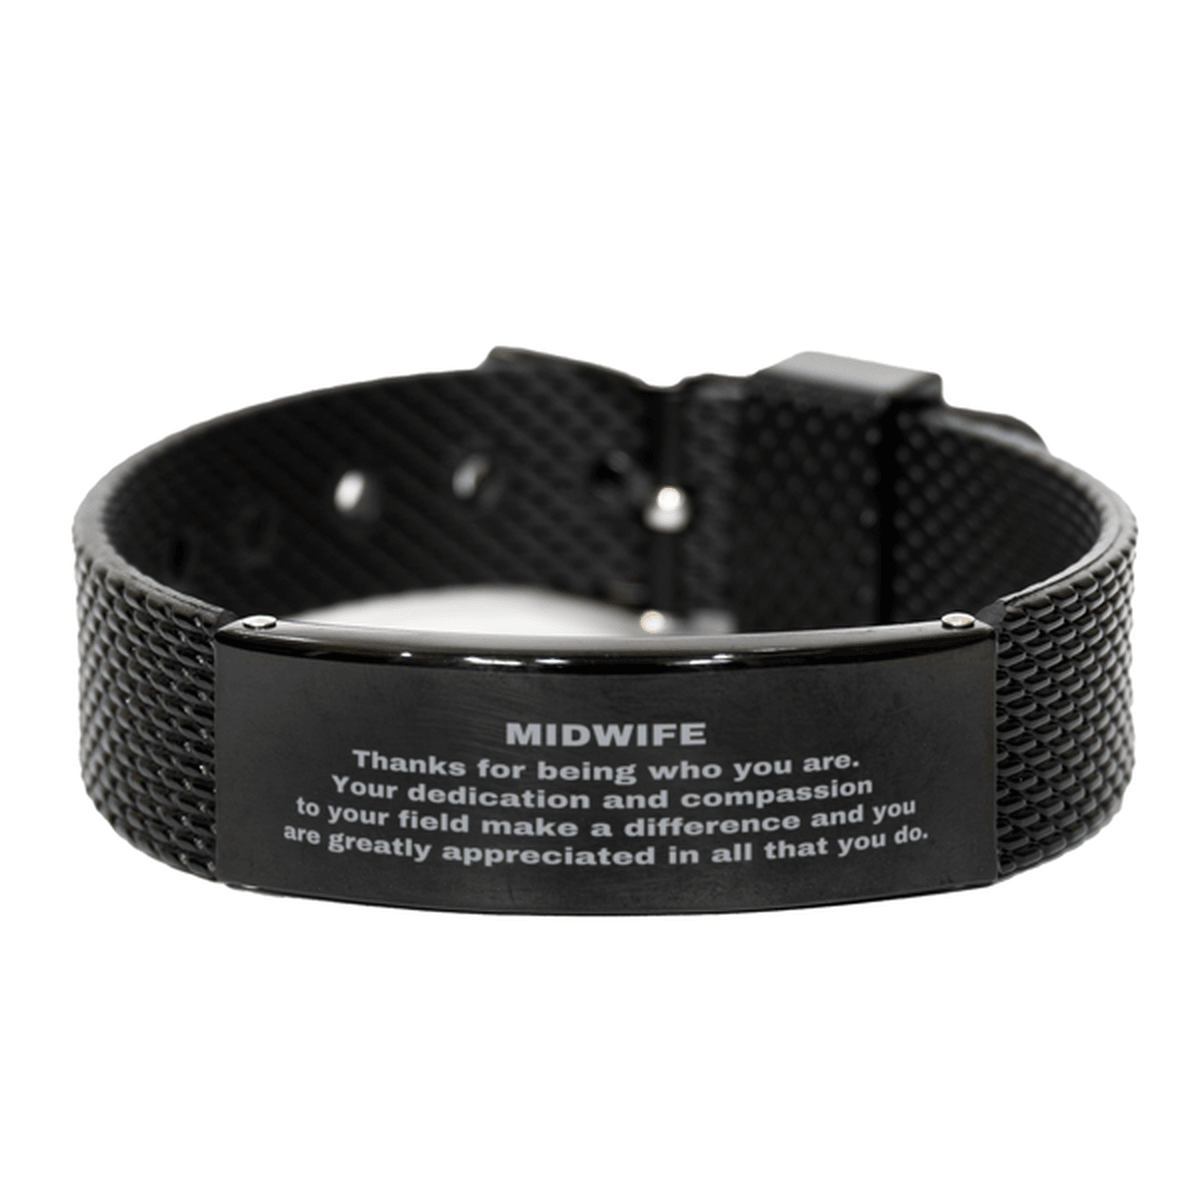 Midwife Black Shark Mesh Stainless Steel Engraved Bracelet - Thanks for being who you are - Birthday Christmas Jewelry Gifts Coworkers Colleague Boss - Mallard Moon Gift Shop